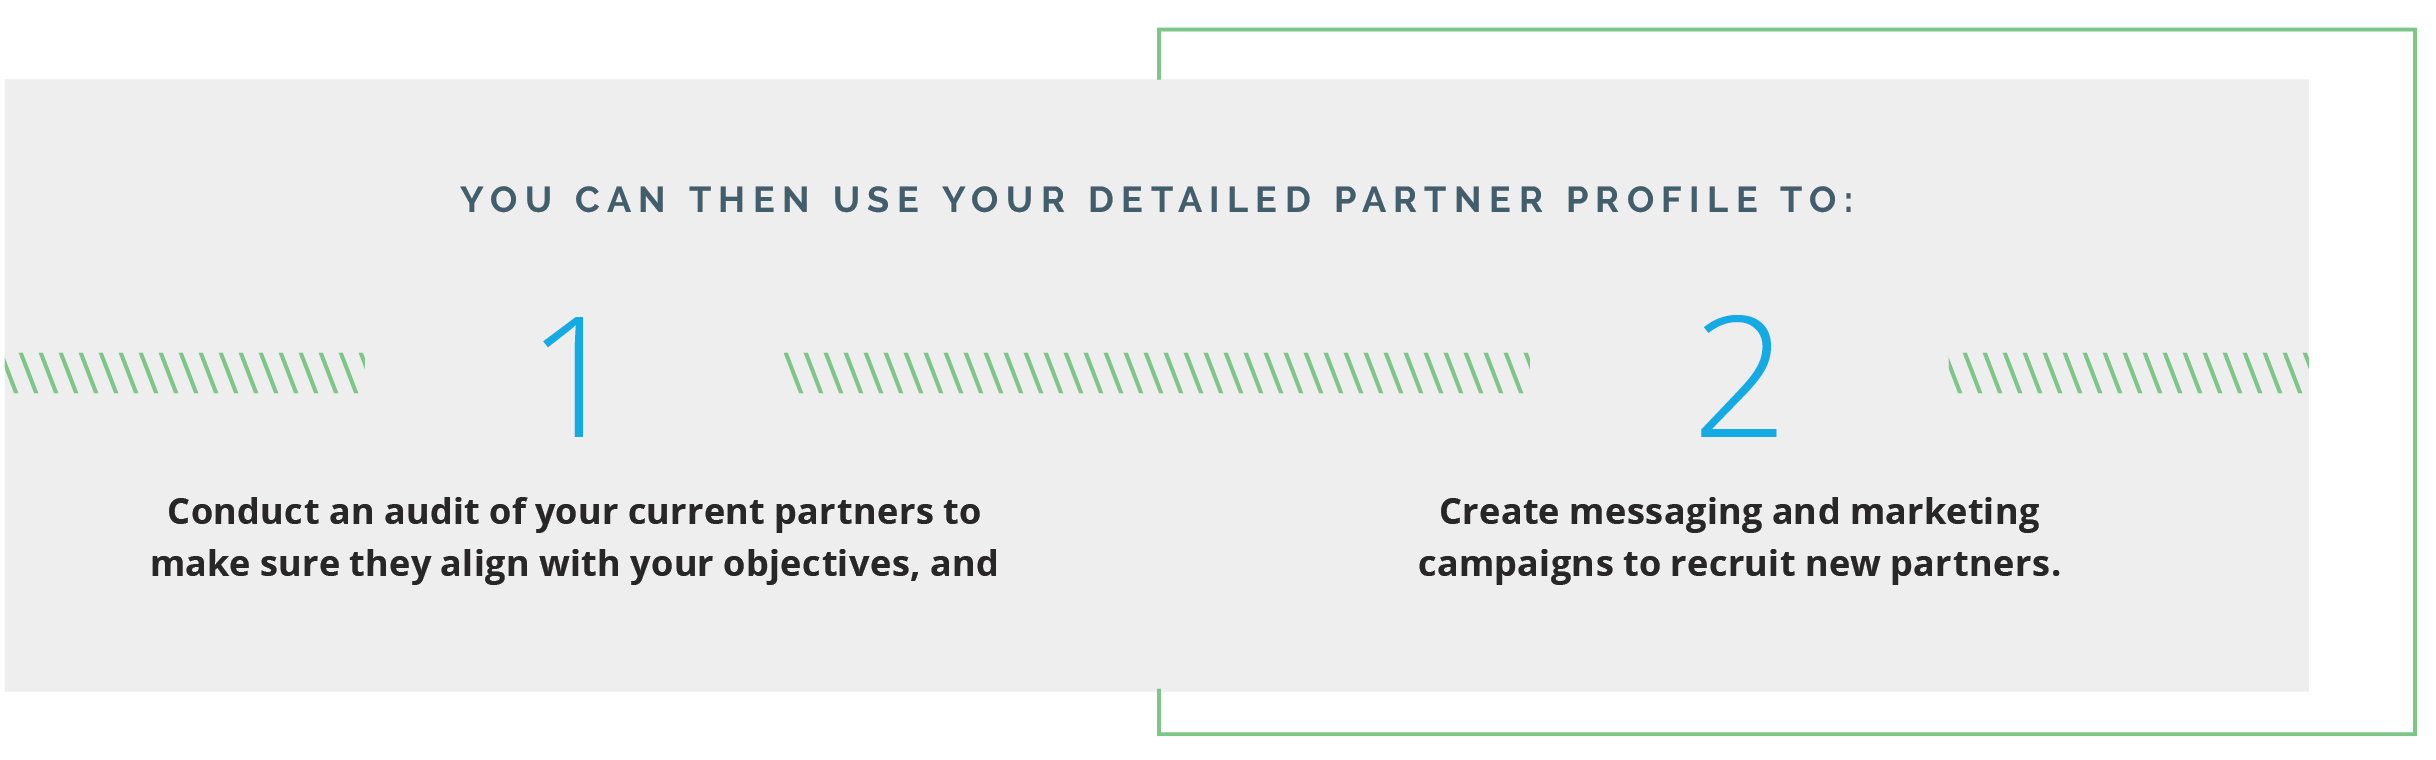 Detailed partner profile graphic